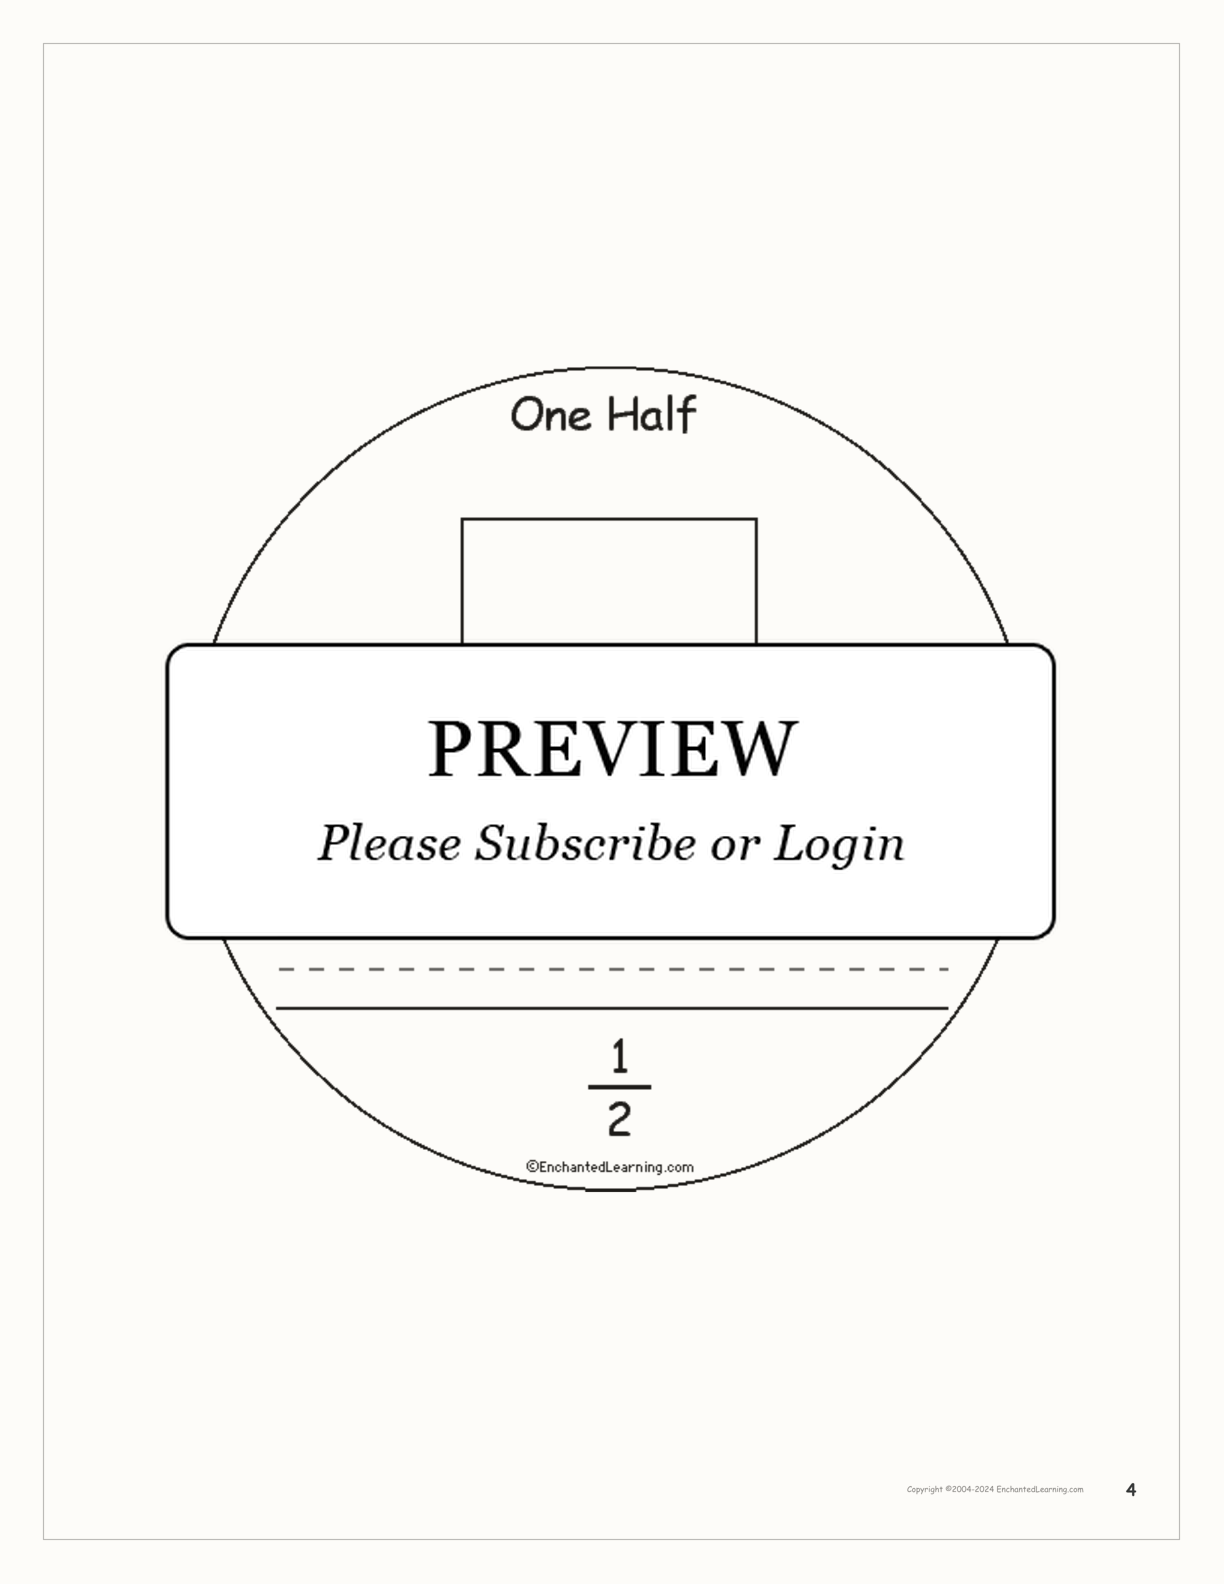 One Half: A Book on Fractions interactive printout page 4